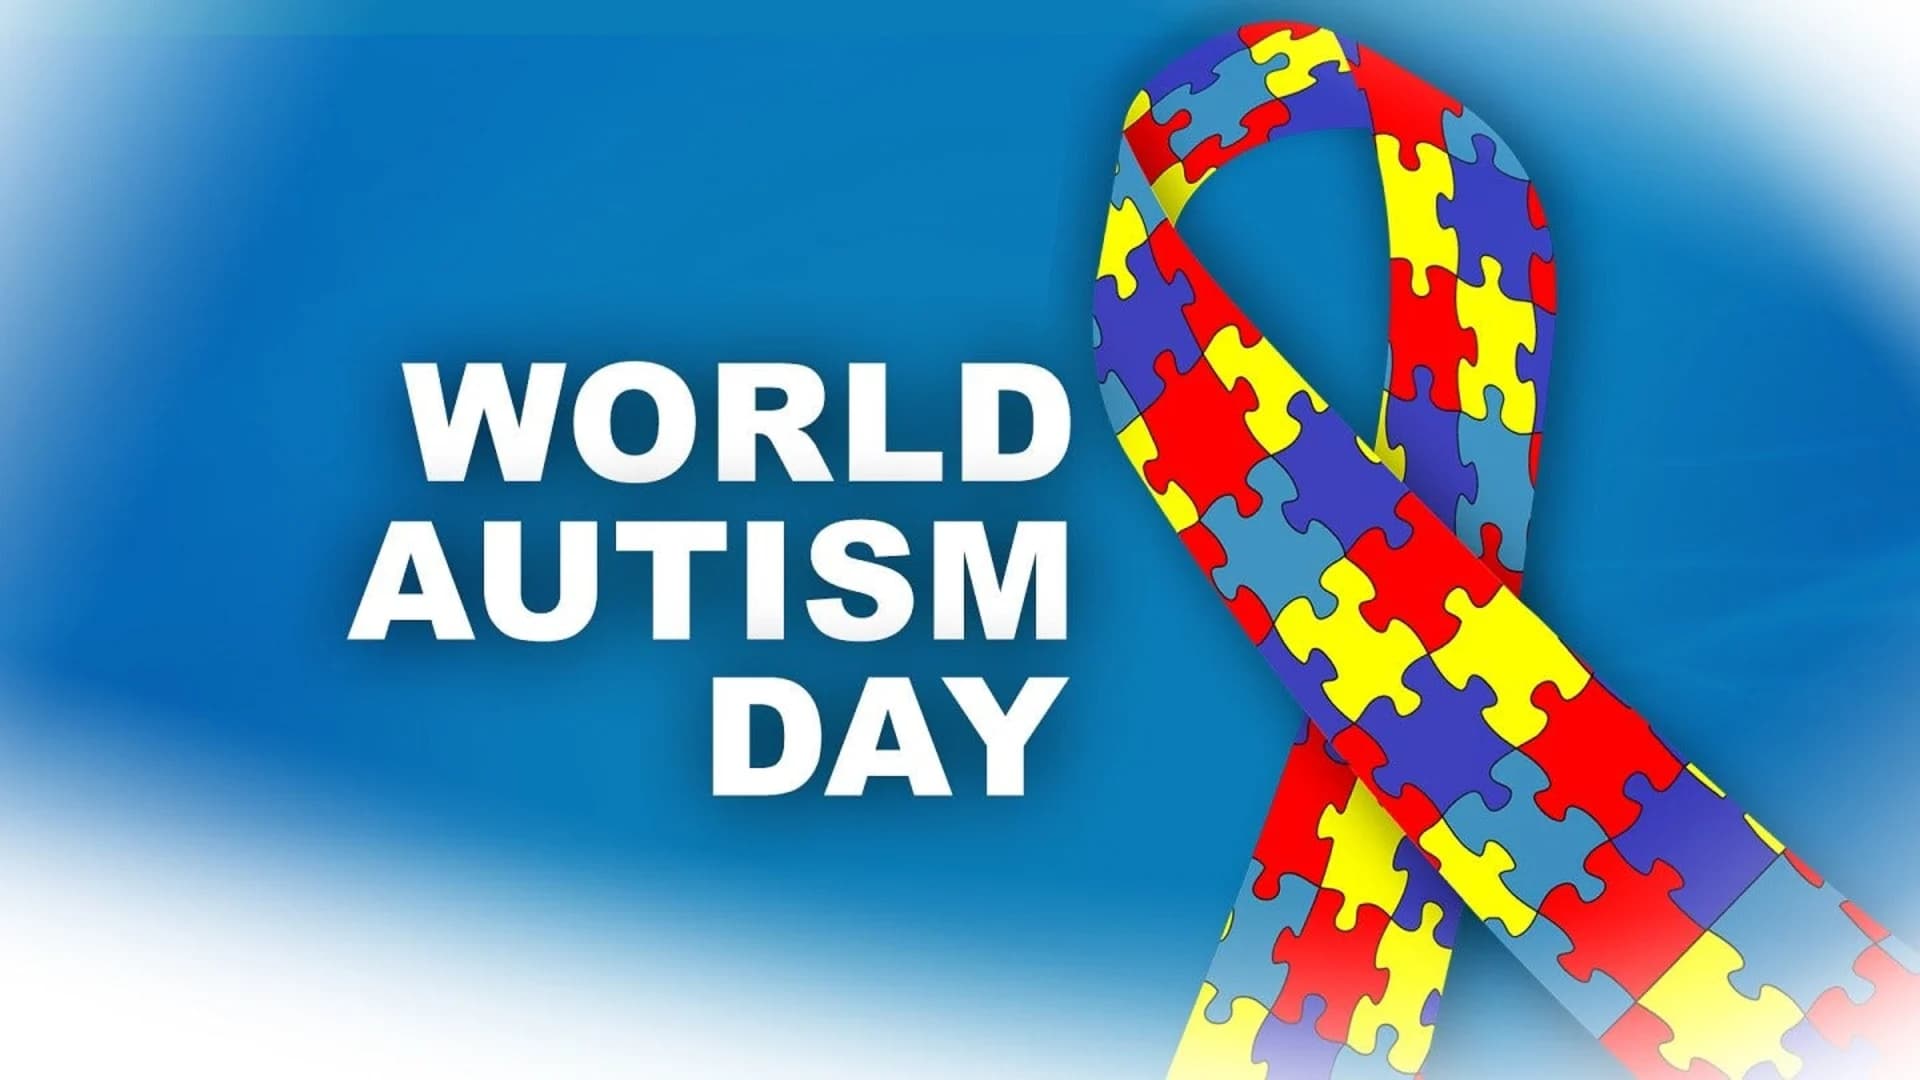 New Jersey does its part to raise awareness on World Autism Day